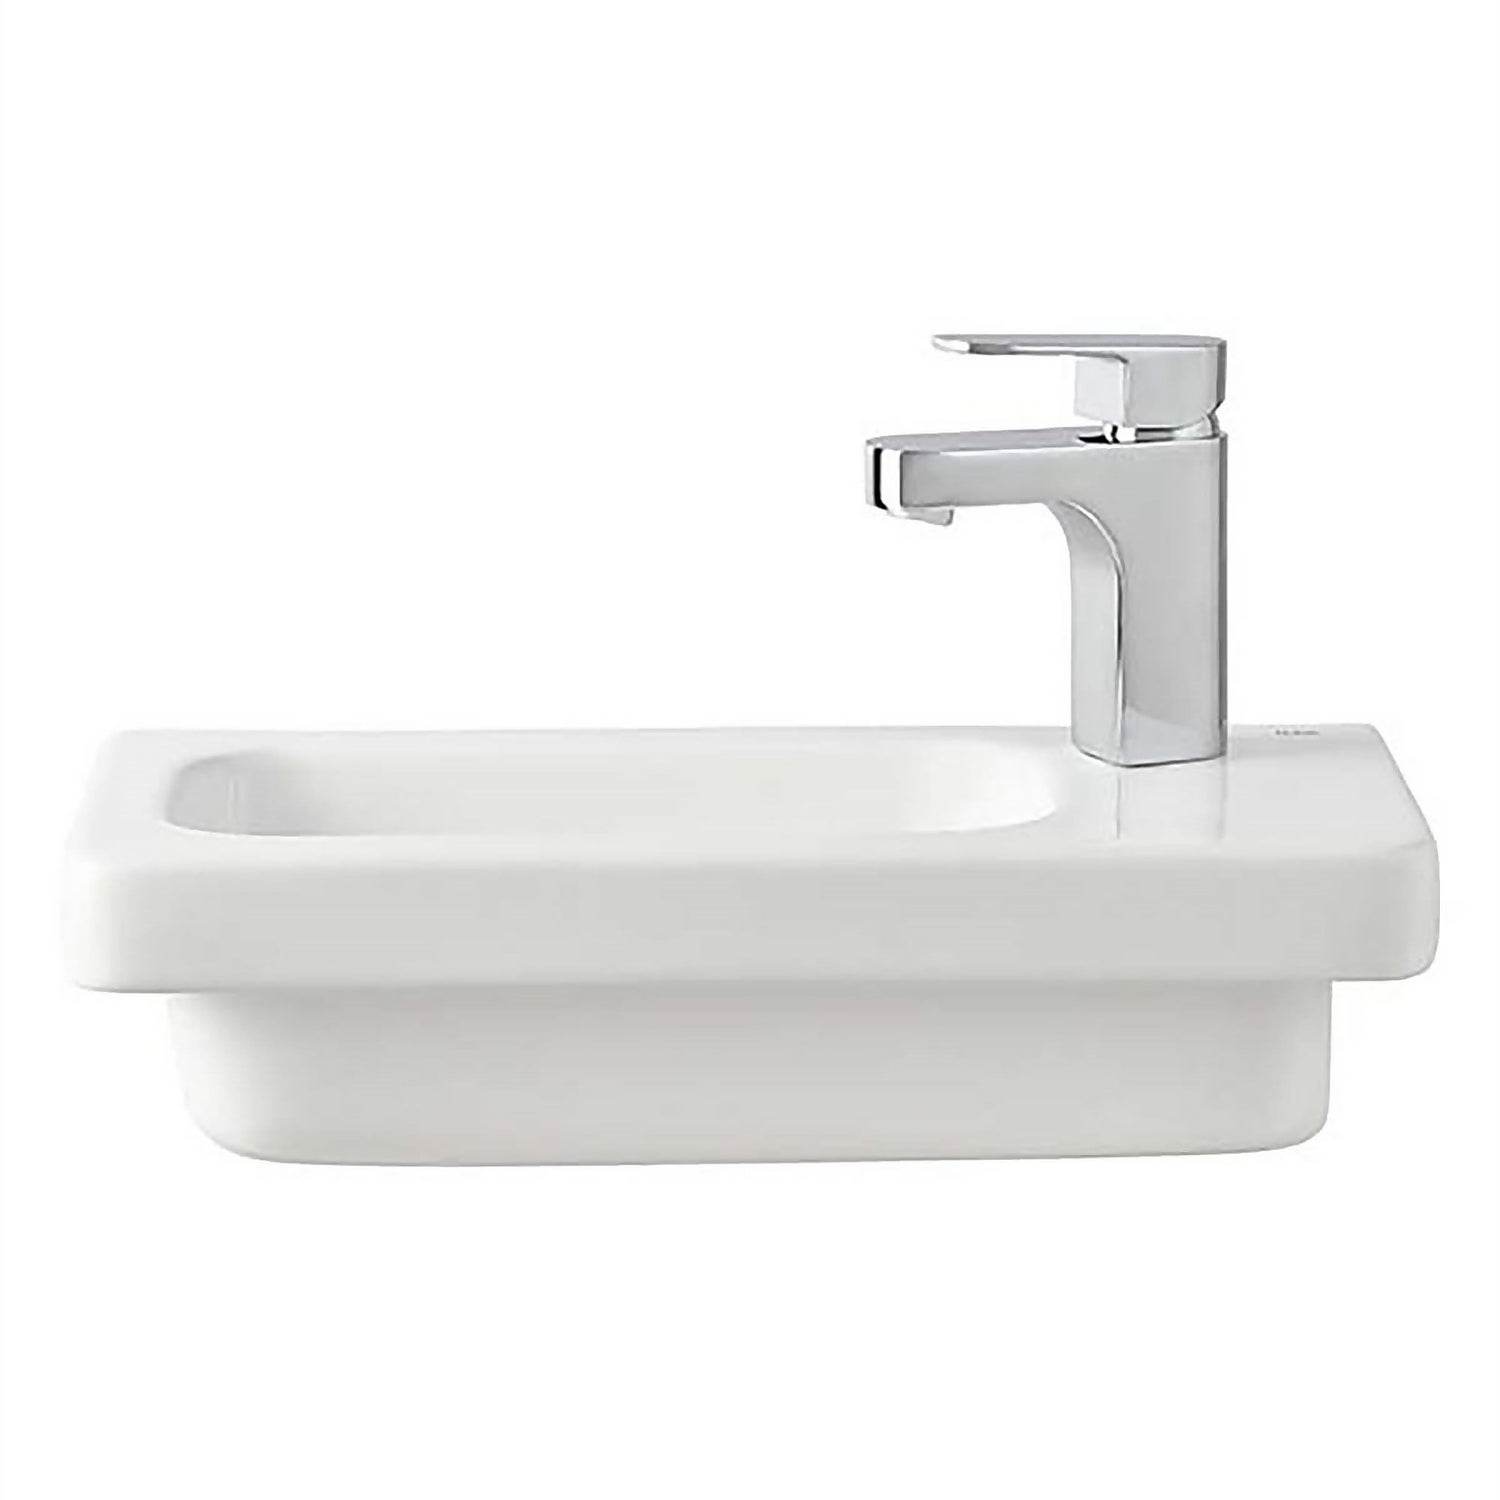 Falcon White Cloakroom Basin with 1 Tap Hole - 450mm